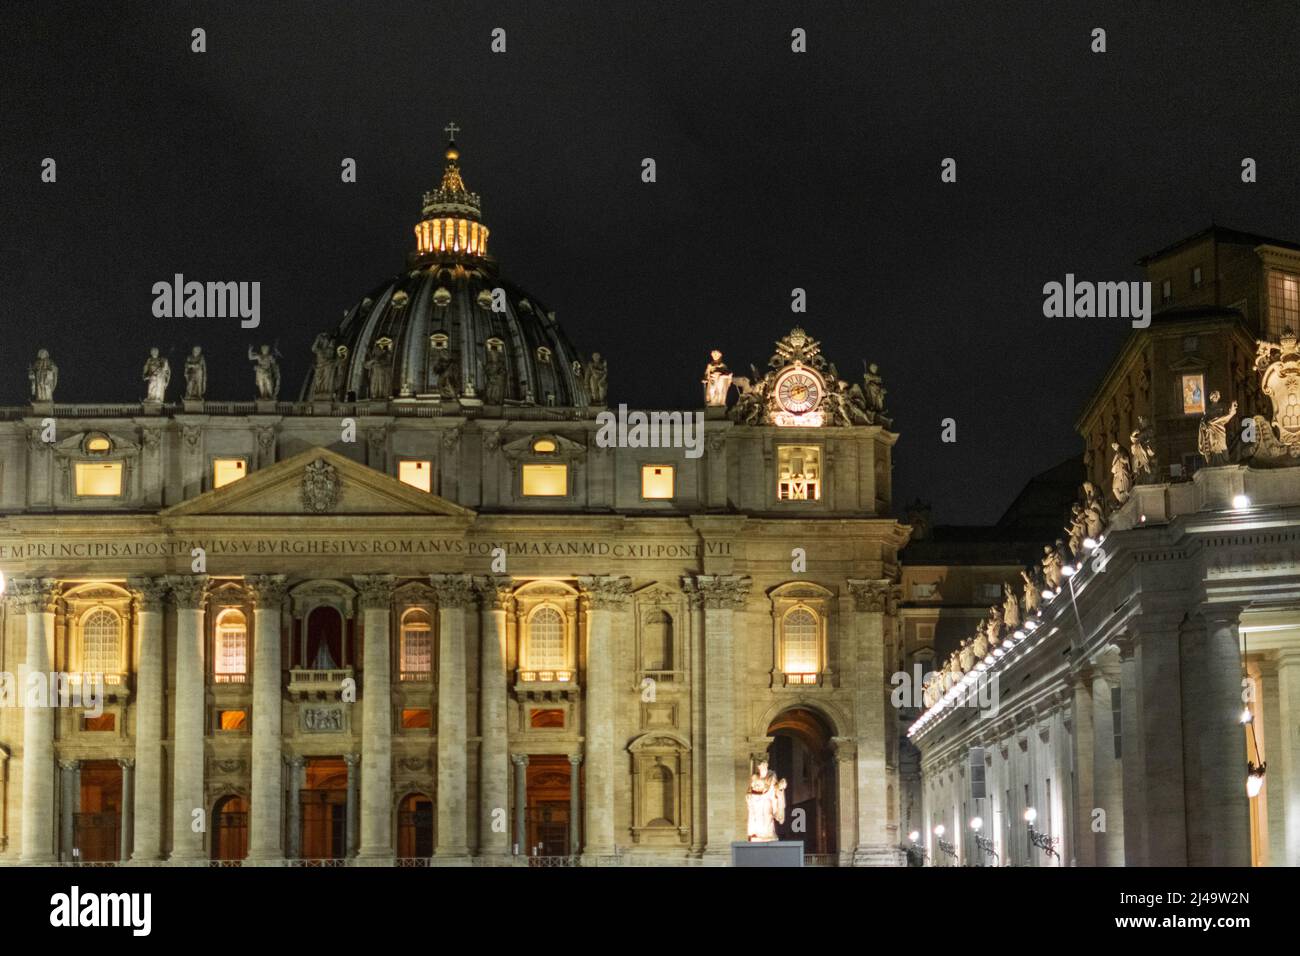 St. Peter's Basilica for the holidays on a rainy evening, Italy Stock Photo